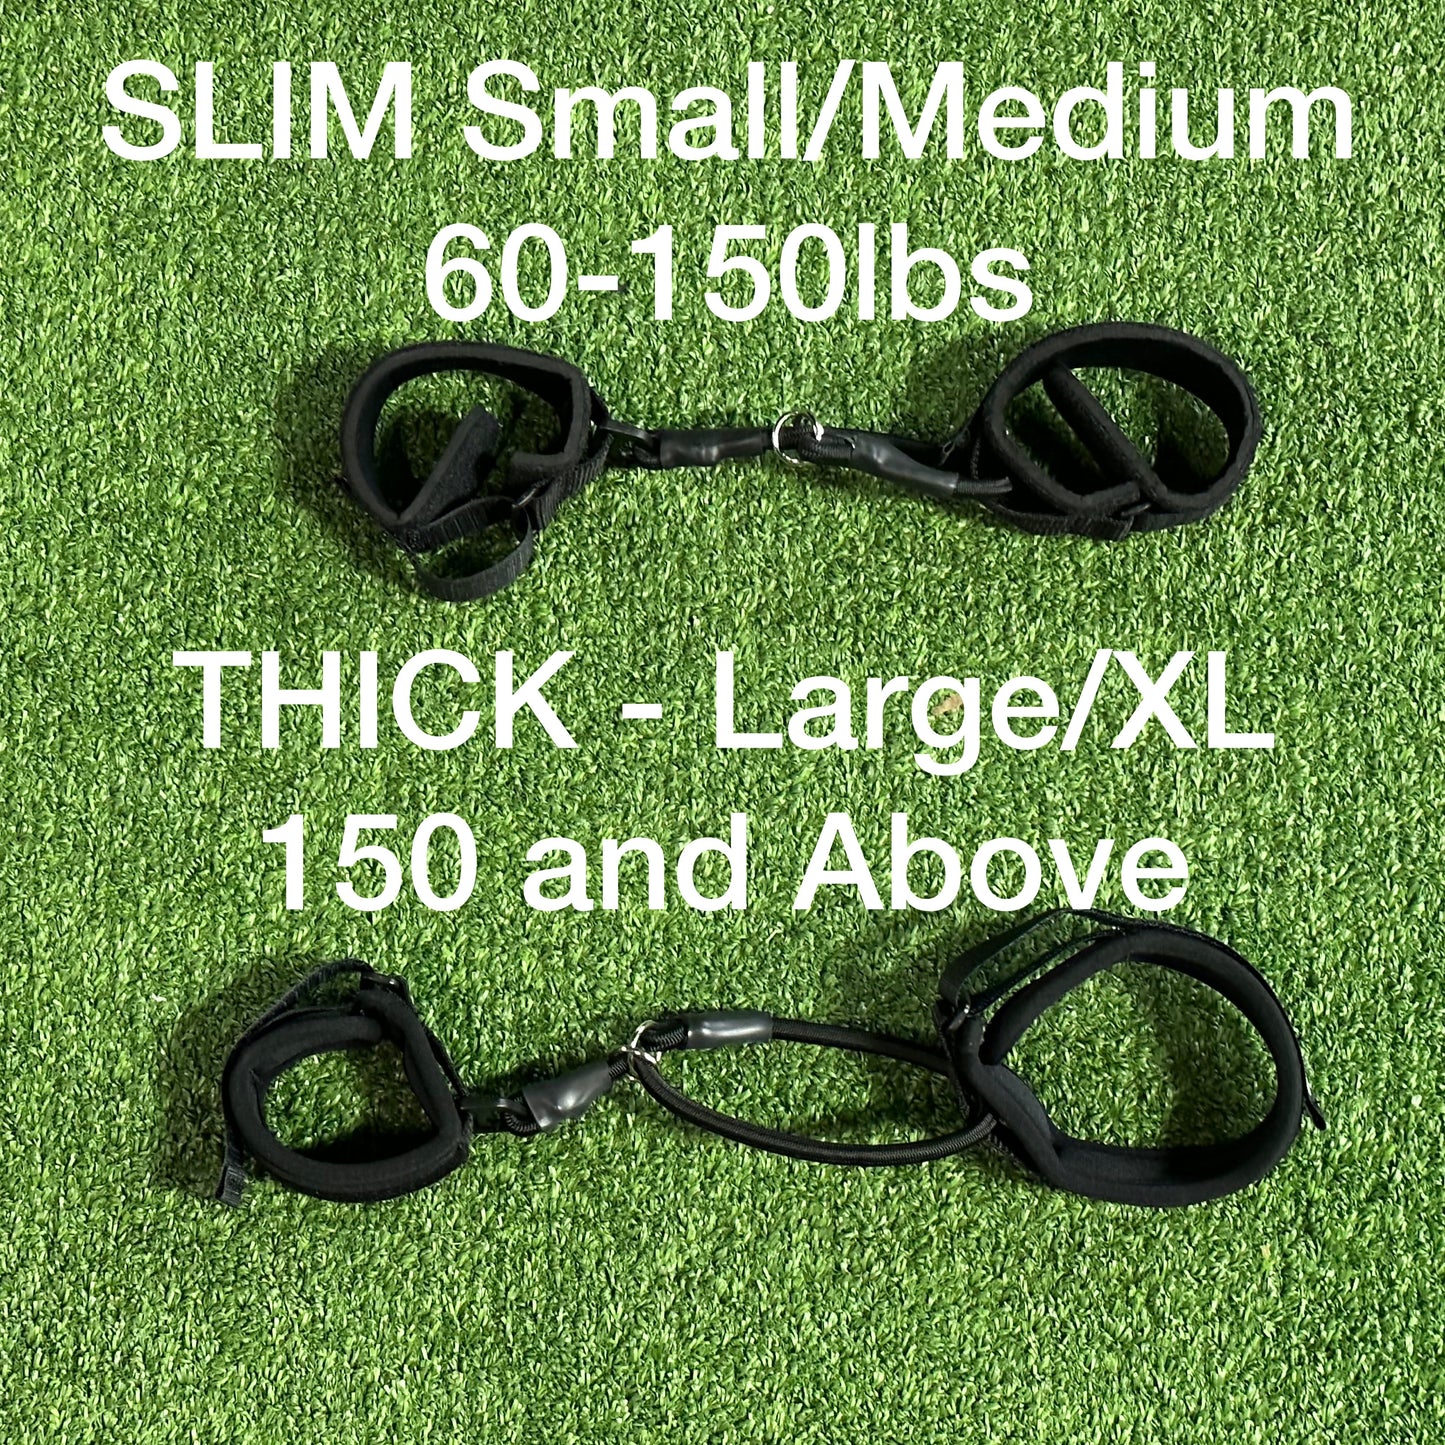 POWER SWING CONNECT (4 Pack Slim)